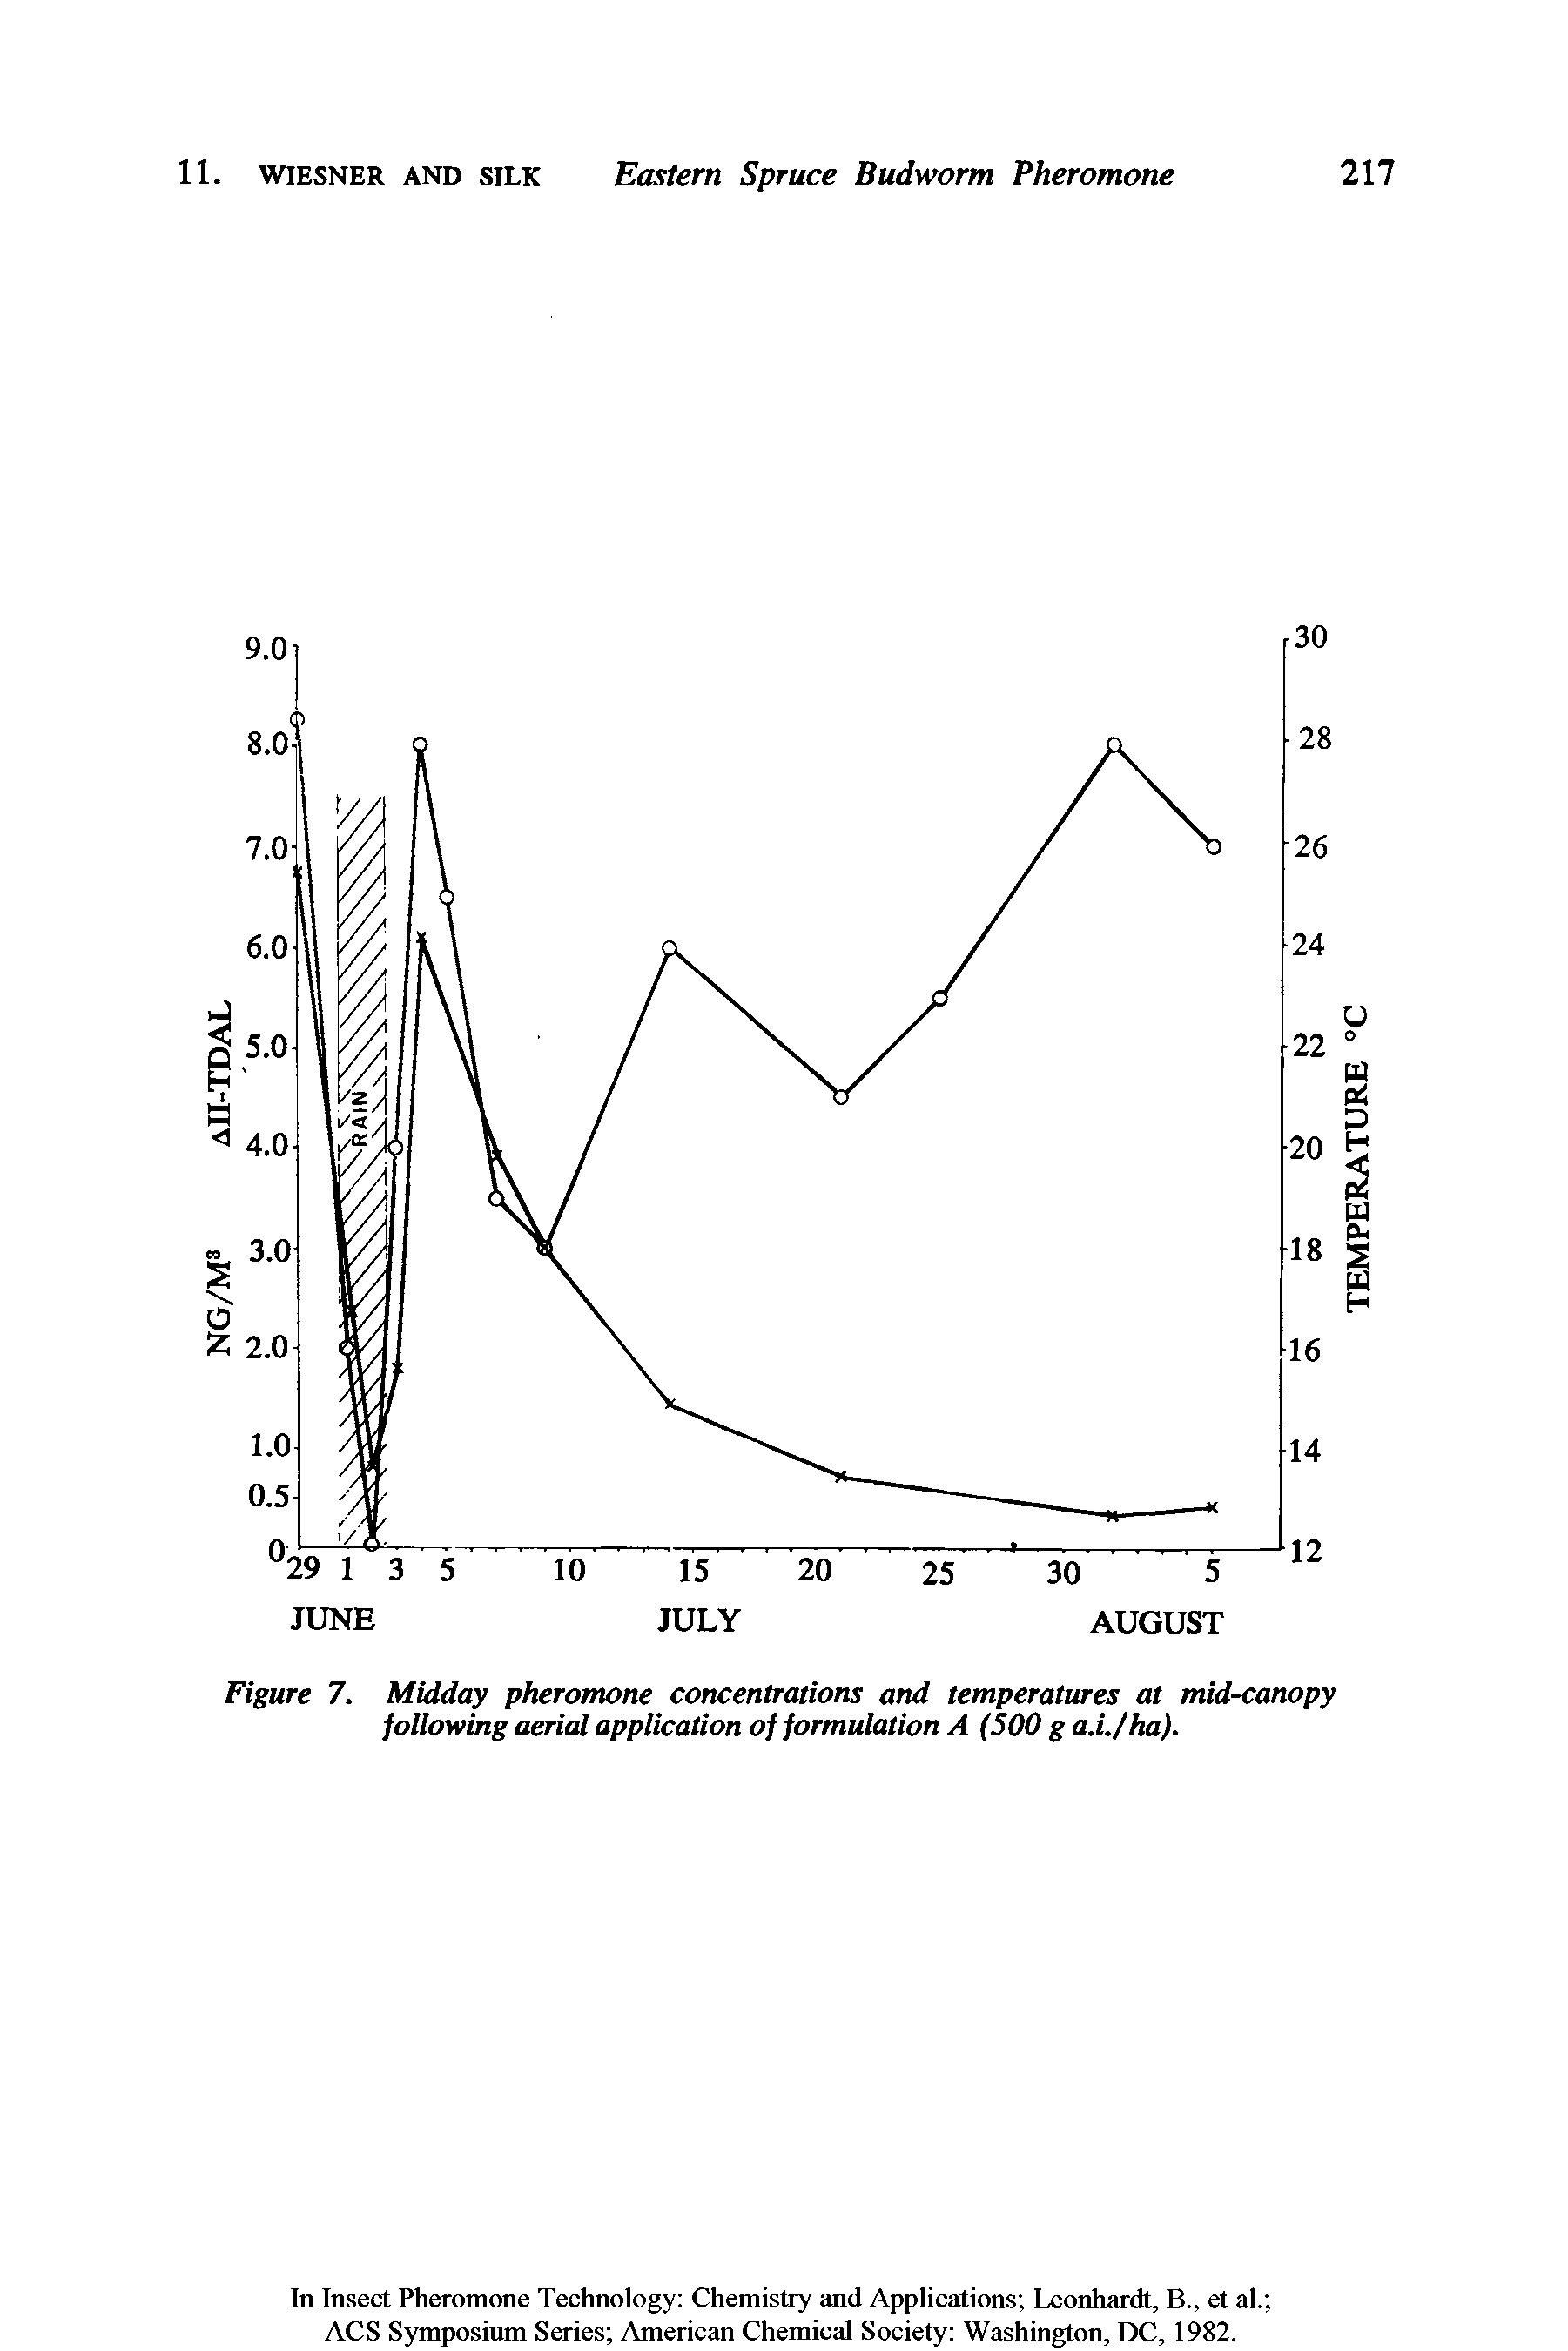 Figure 7. Midday pheromone concentrations and temperatures at mid-canopy following aerial application of formulation A (500 g a.i./ha).